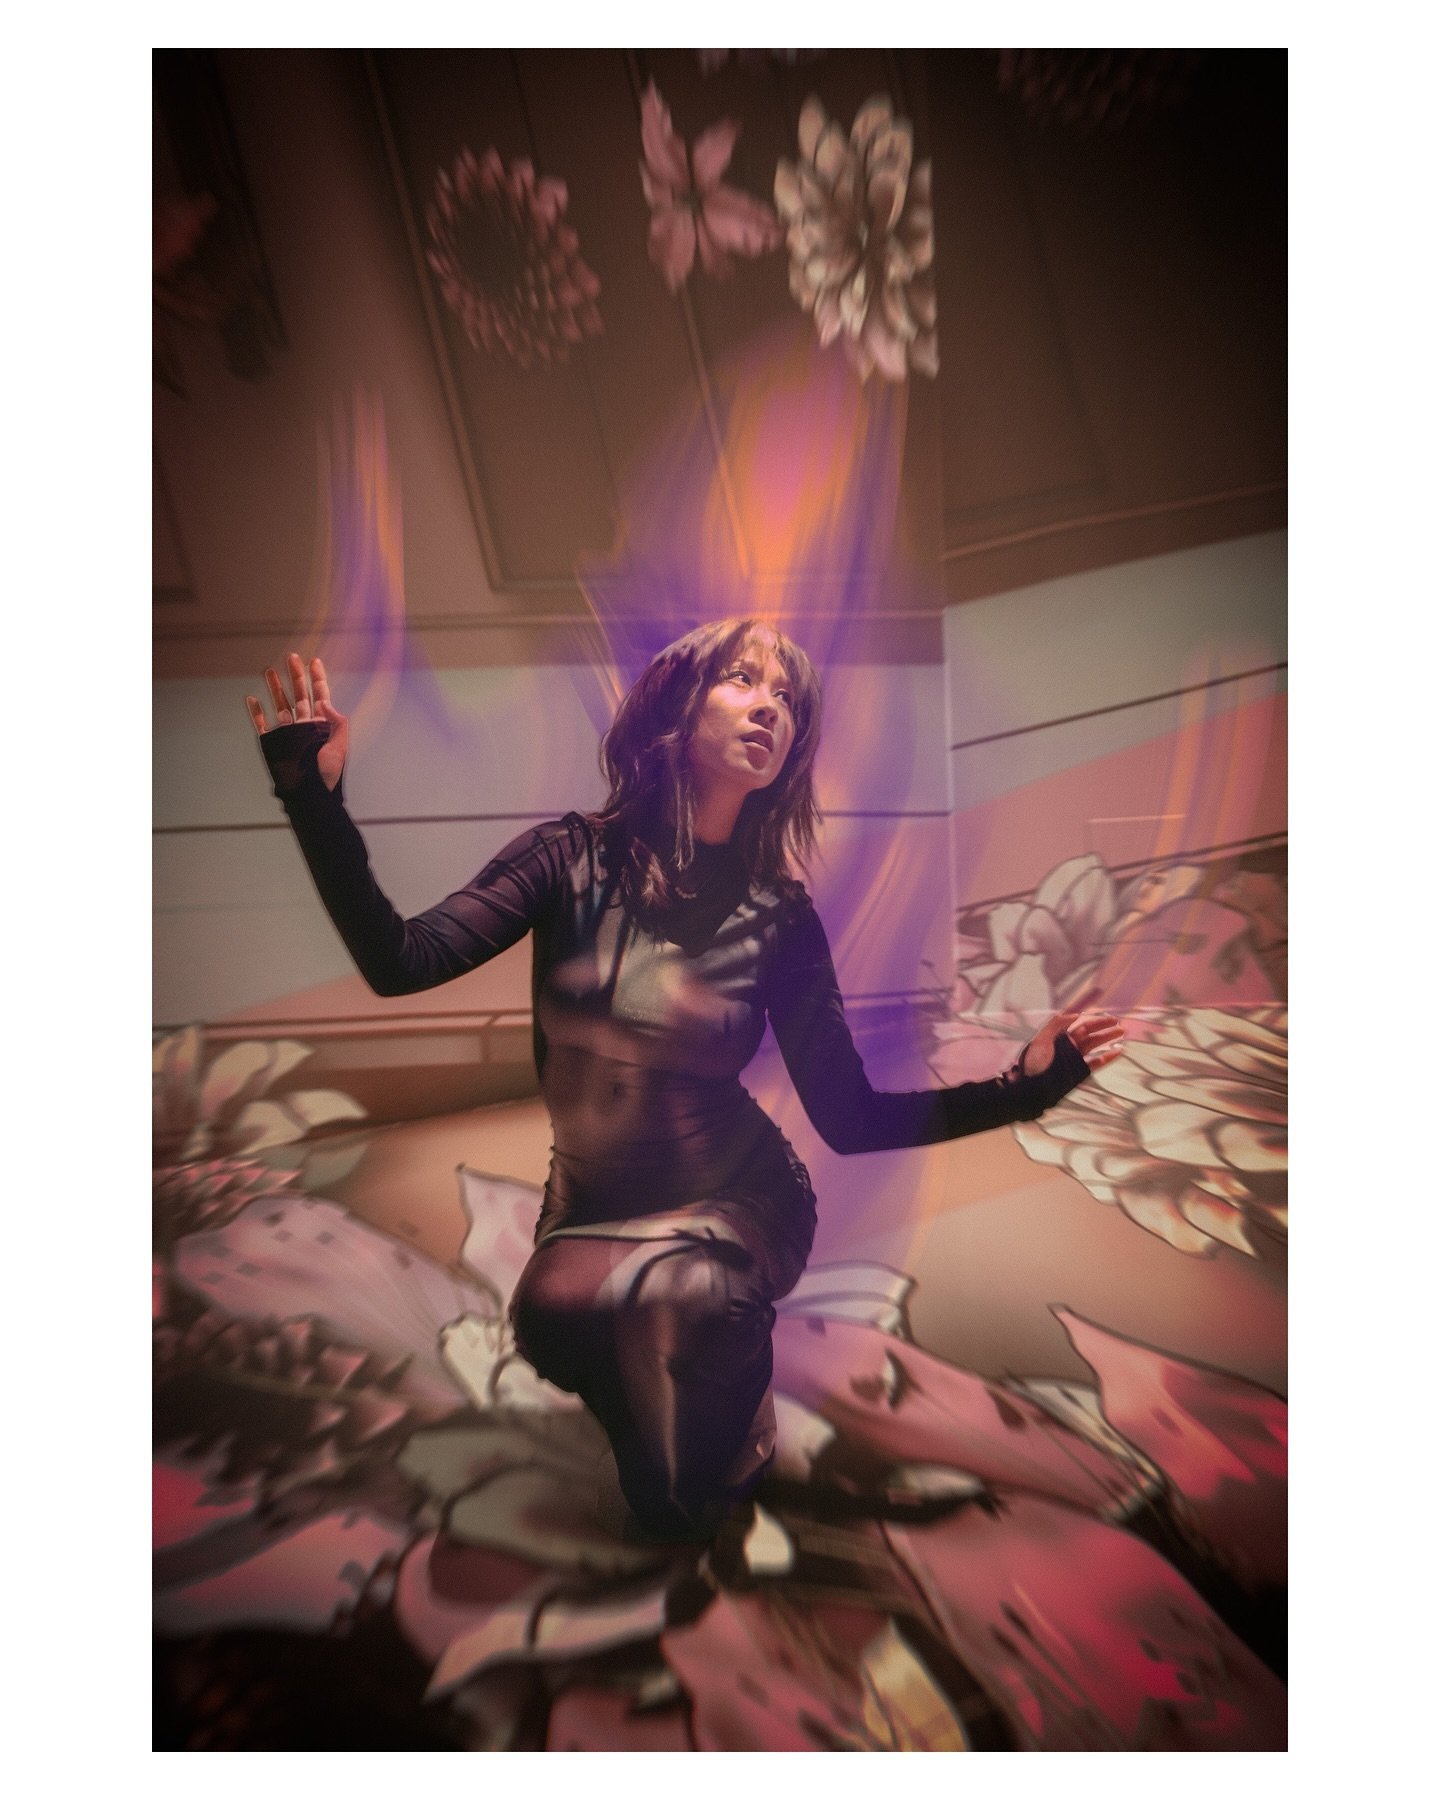 🌸 Lost in a mesmerizing world at @artechouse&rsquo;s ISEKAI exhibit with @portraitmeetdc 🌌 @rebebechen striking a pose amidst dreamy projections! 📸✨ Played around with blur effects, enhancing the mood! 💻💫 Dive into my feed for more creative wond